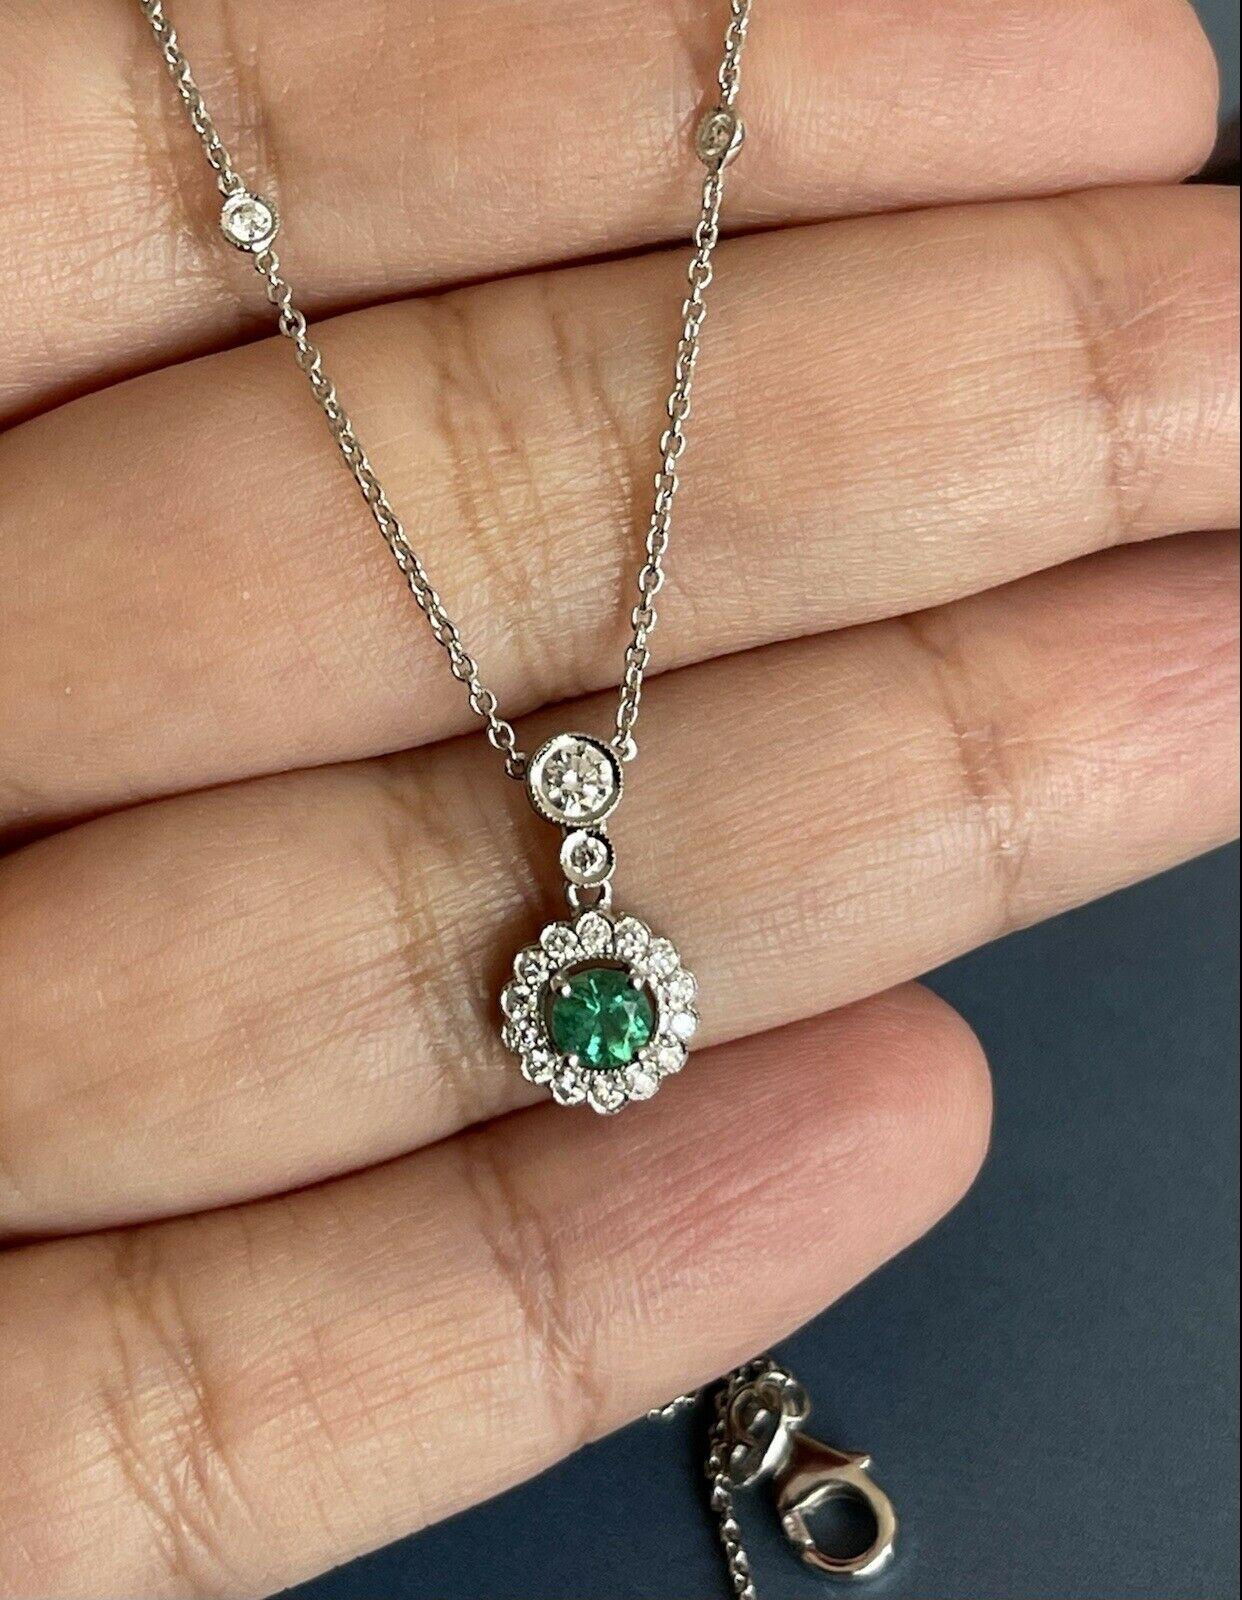 High jewellery meets Classic

One a kind necklace with by the yard chain set with round halo pendant

AAA Colombian deep green emerald

Diamond are:

Colour : F

Clarity : VS1

Hallmarked 750 for Gold

18 inch long chain also hallmarked 750 for